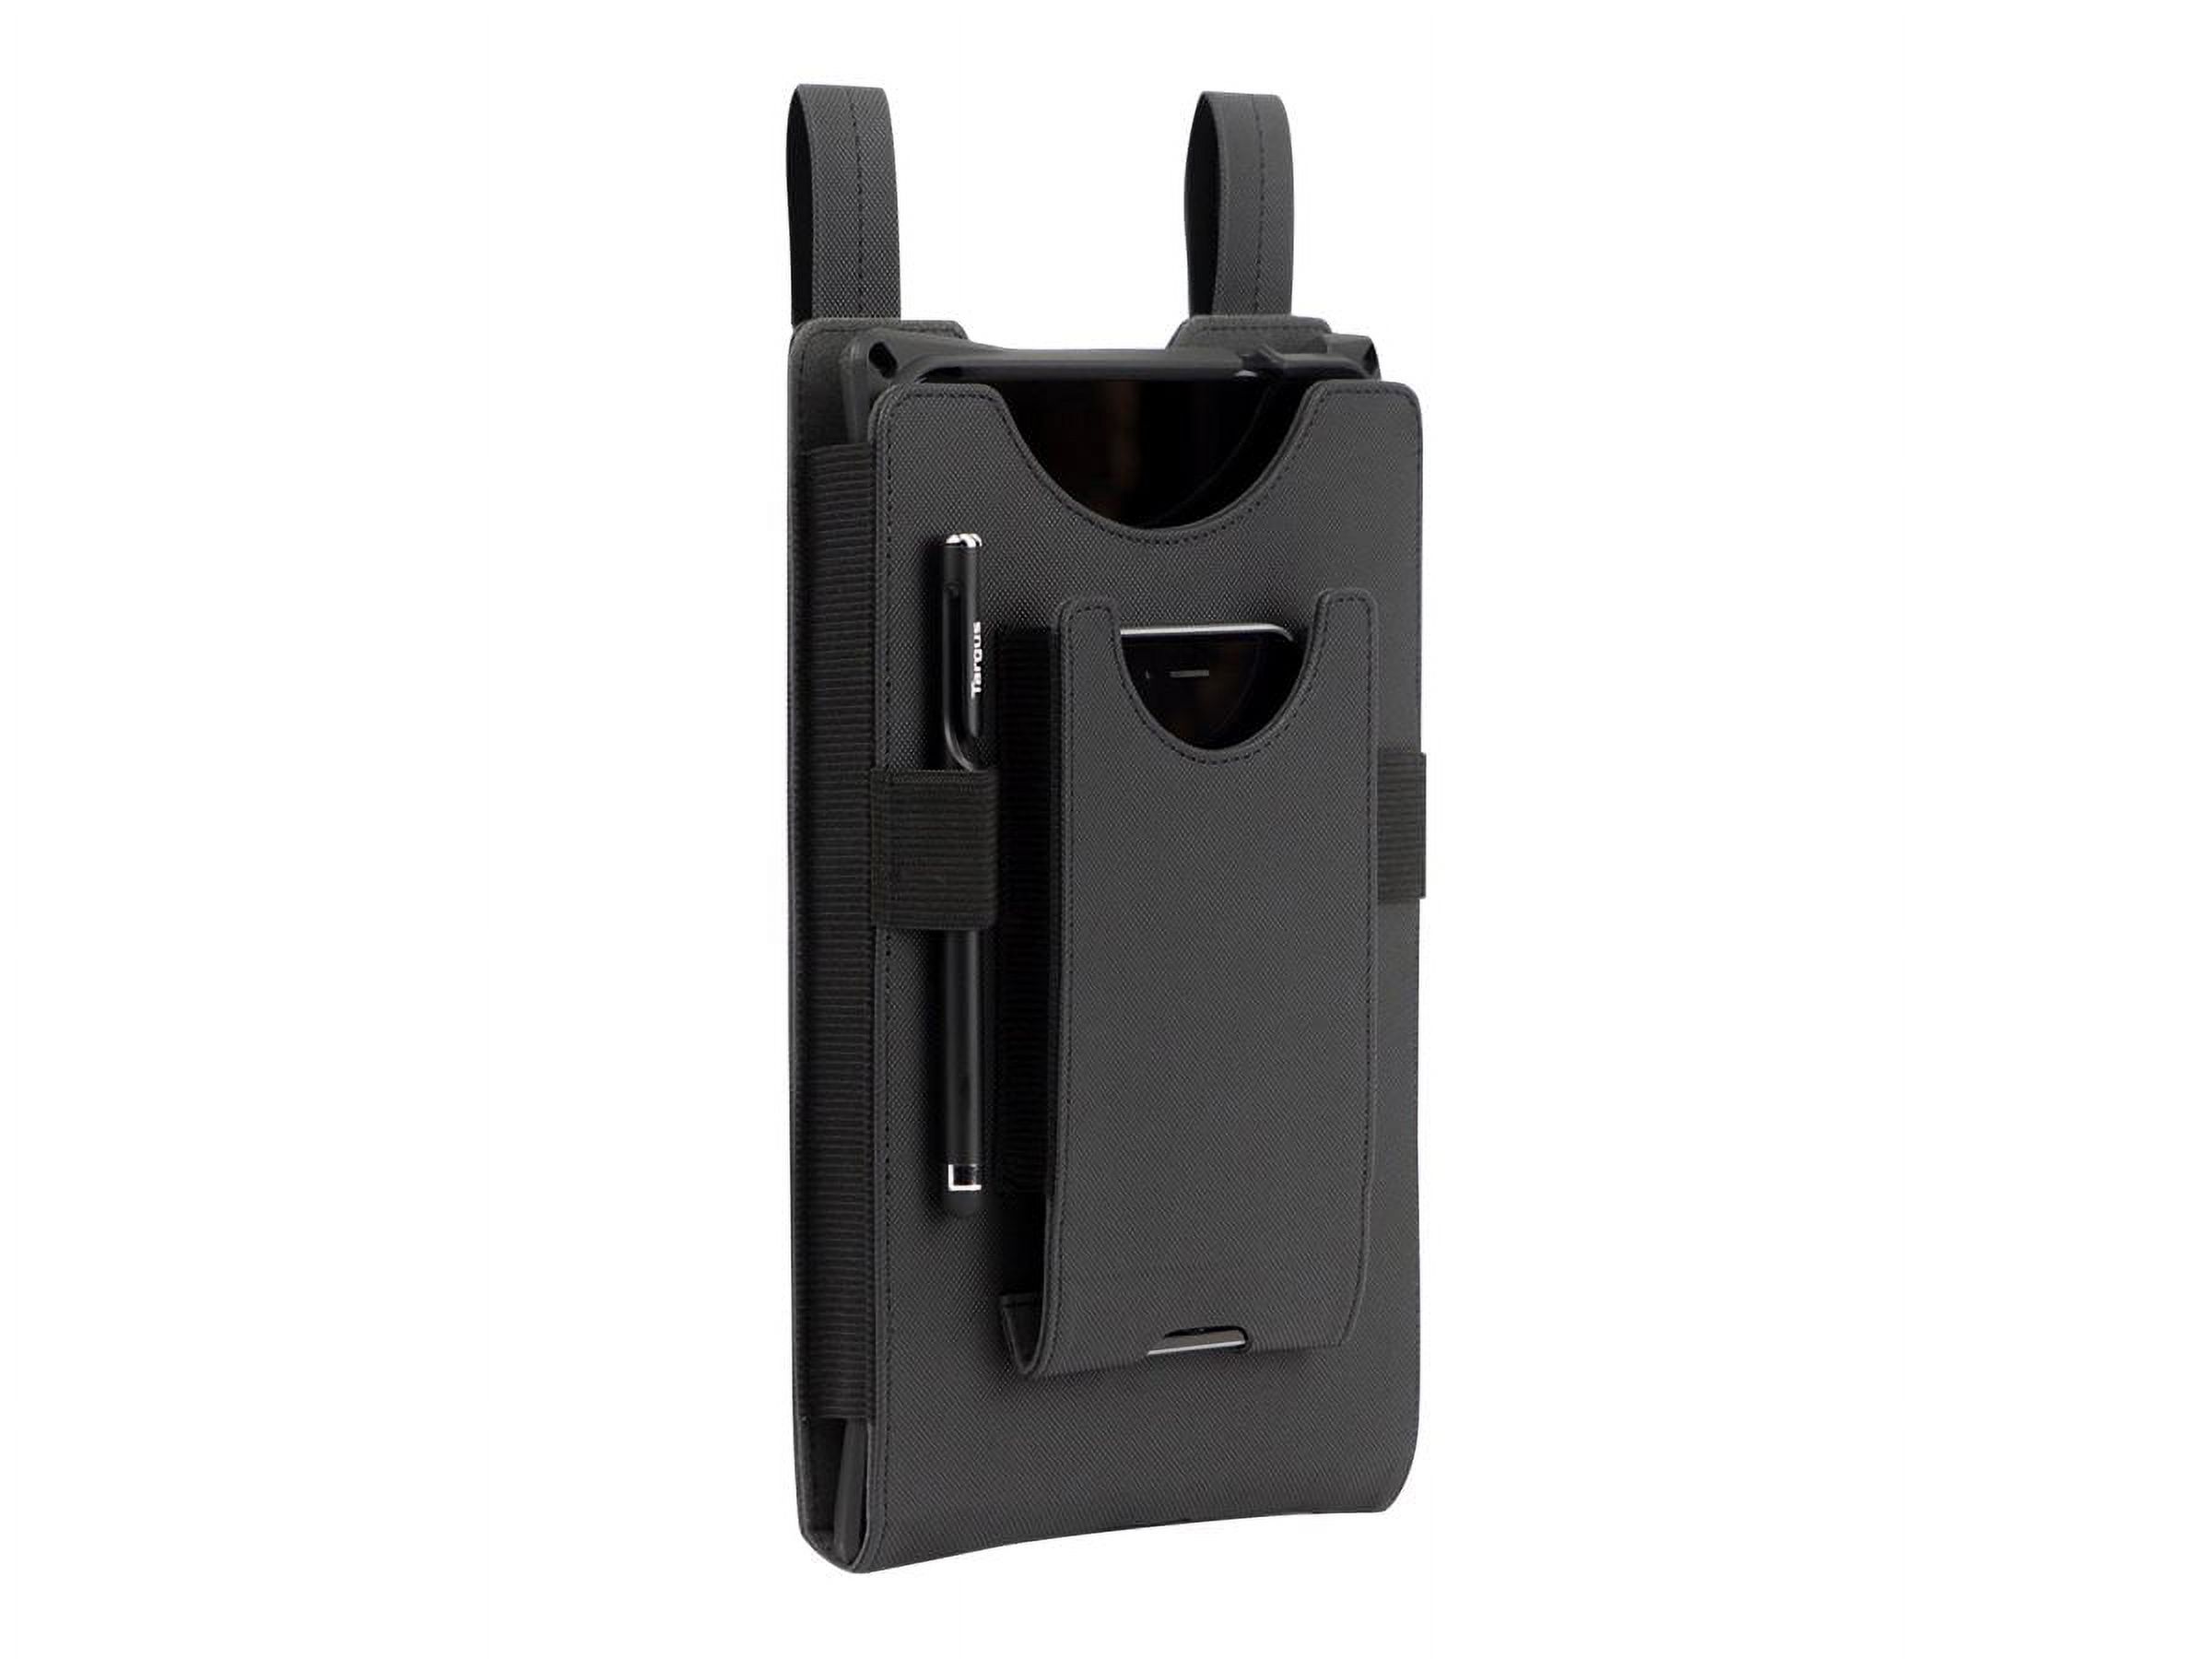 Targus THD474GLZ Carrying Case (Holster) for 8" Tablet, Black - image 4 of 11